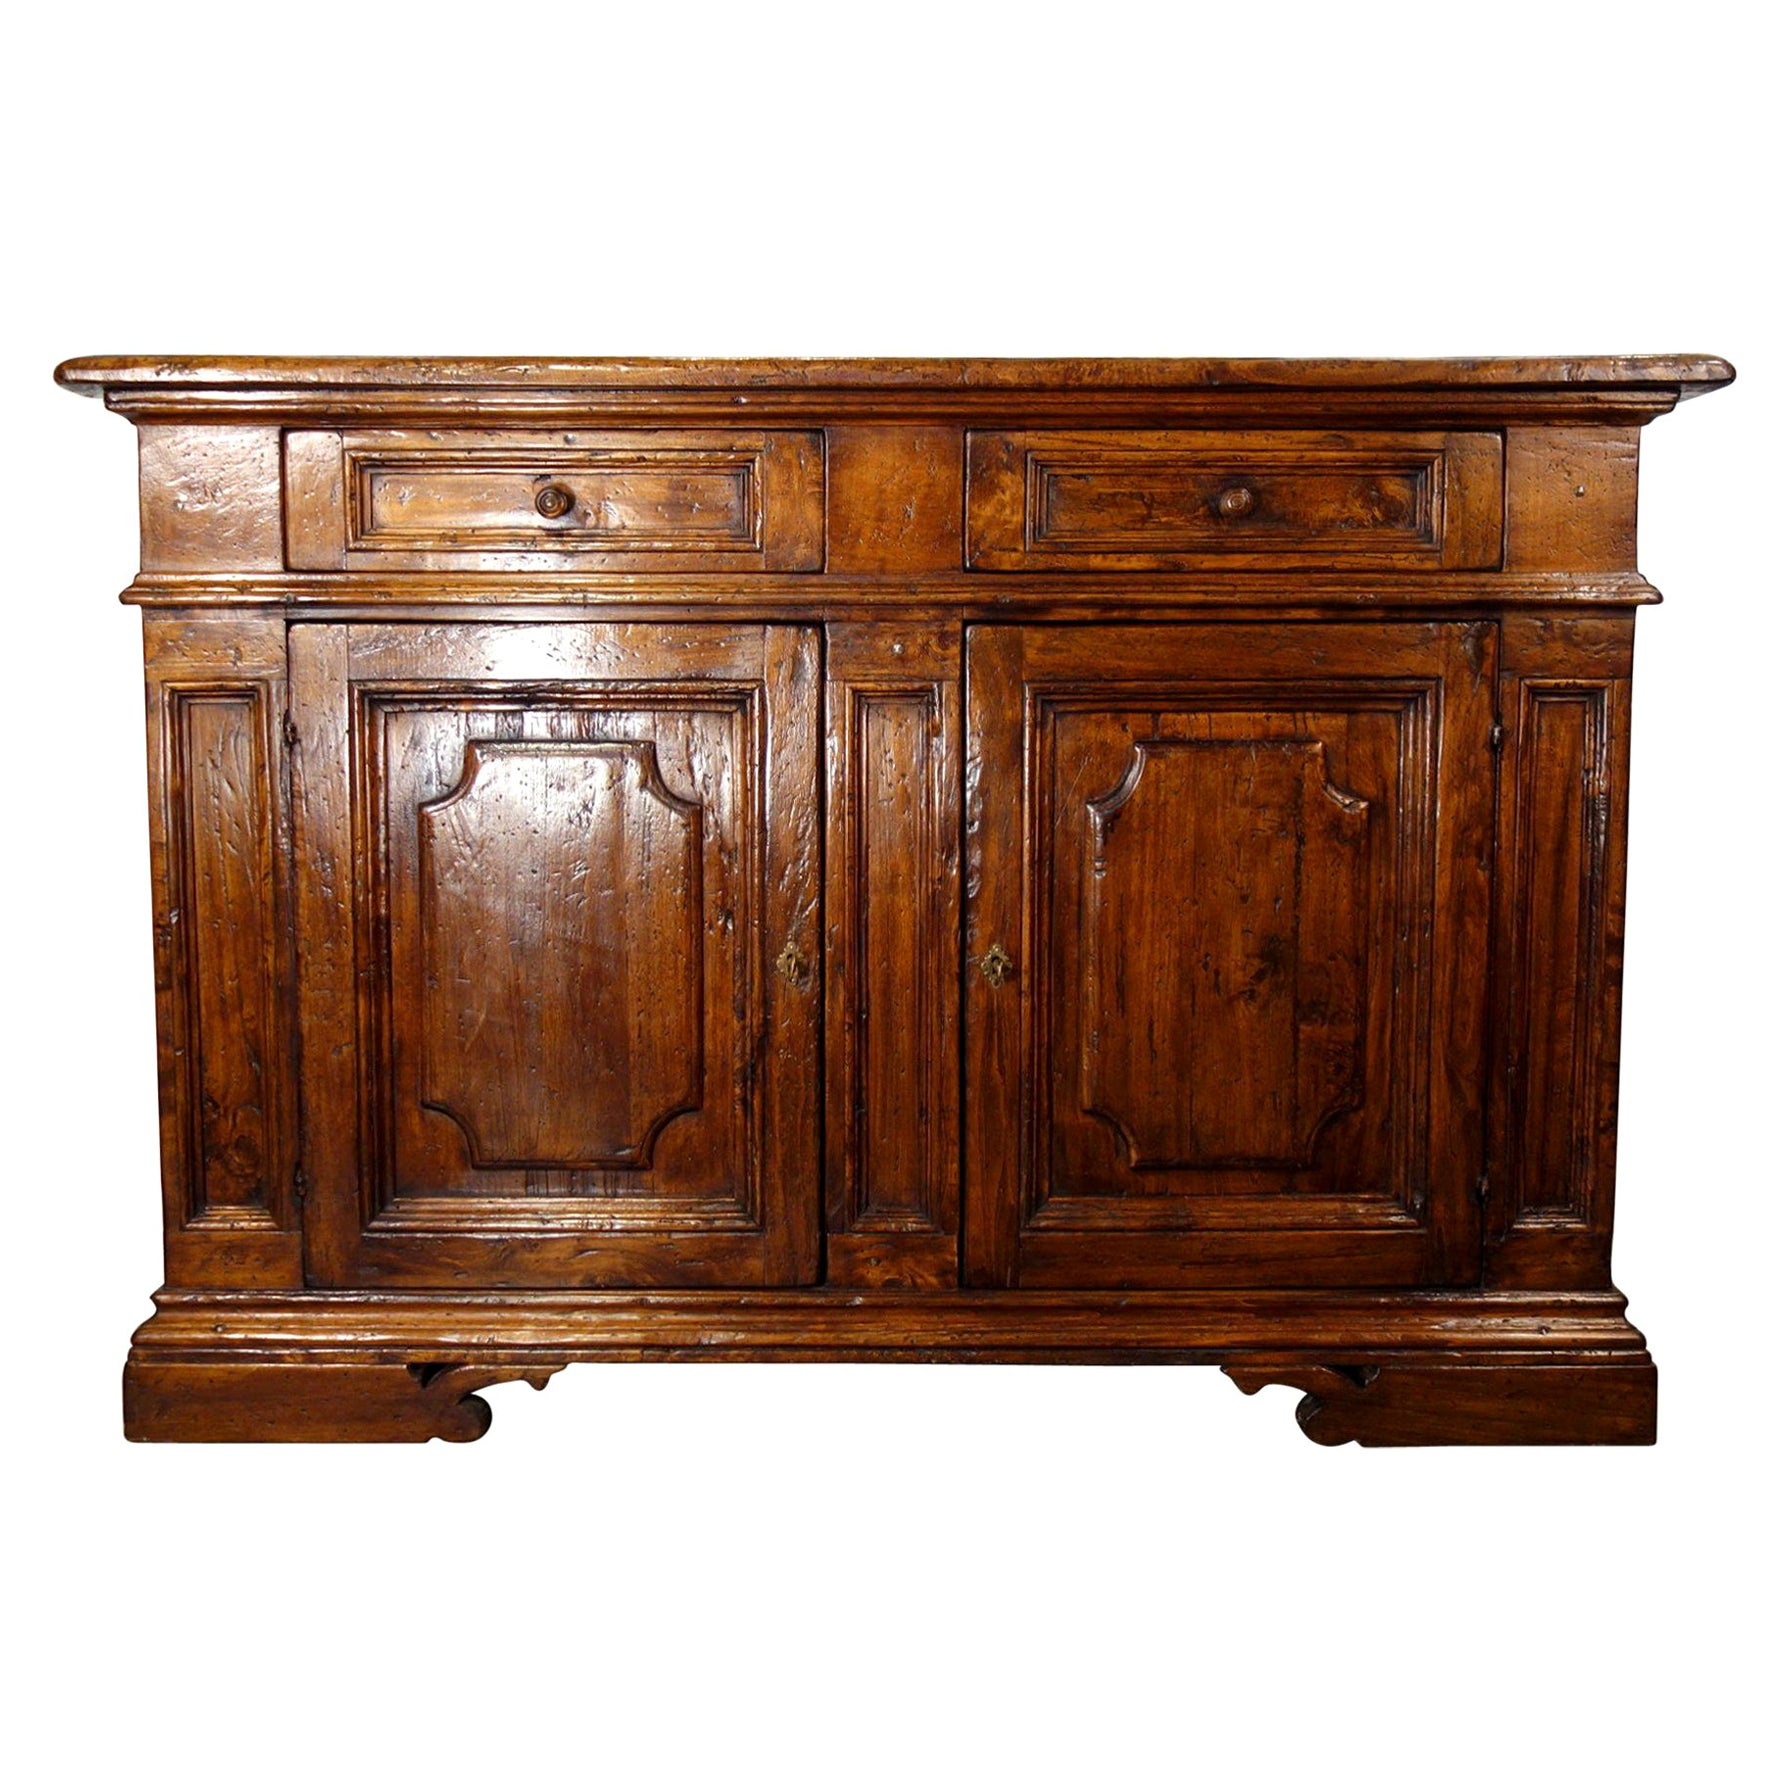 17th C Style FIRENZE Rustic Italian Credenza Size & Finish Options to order For Sale